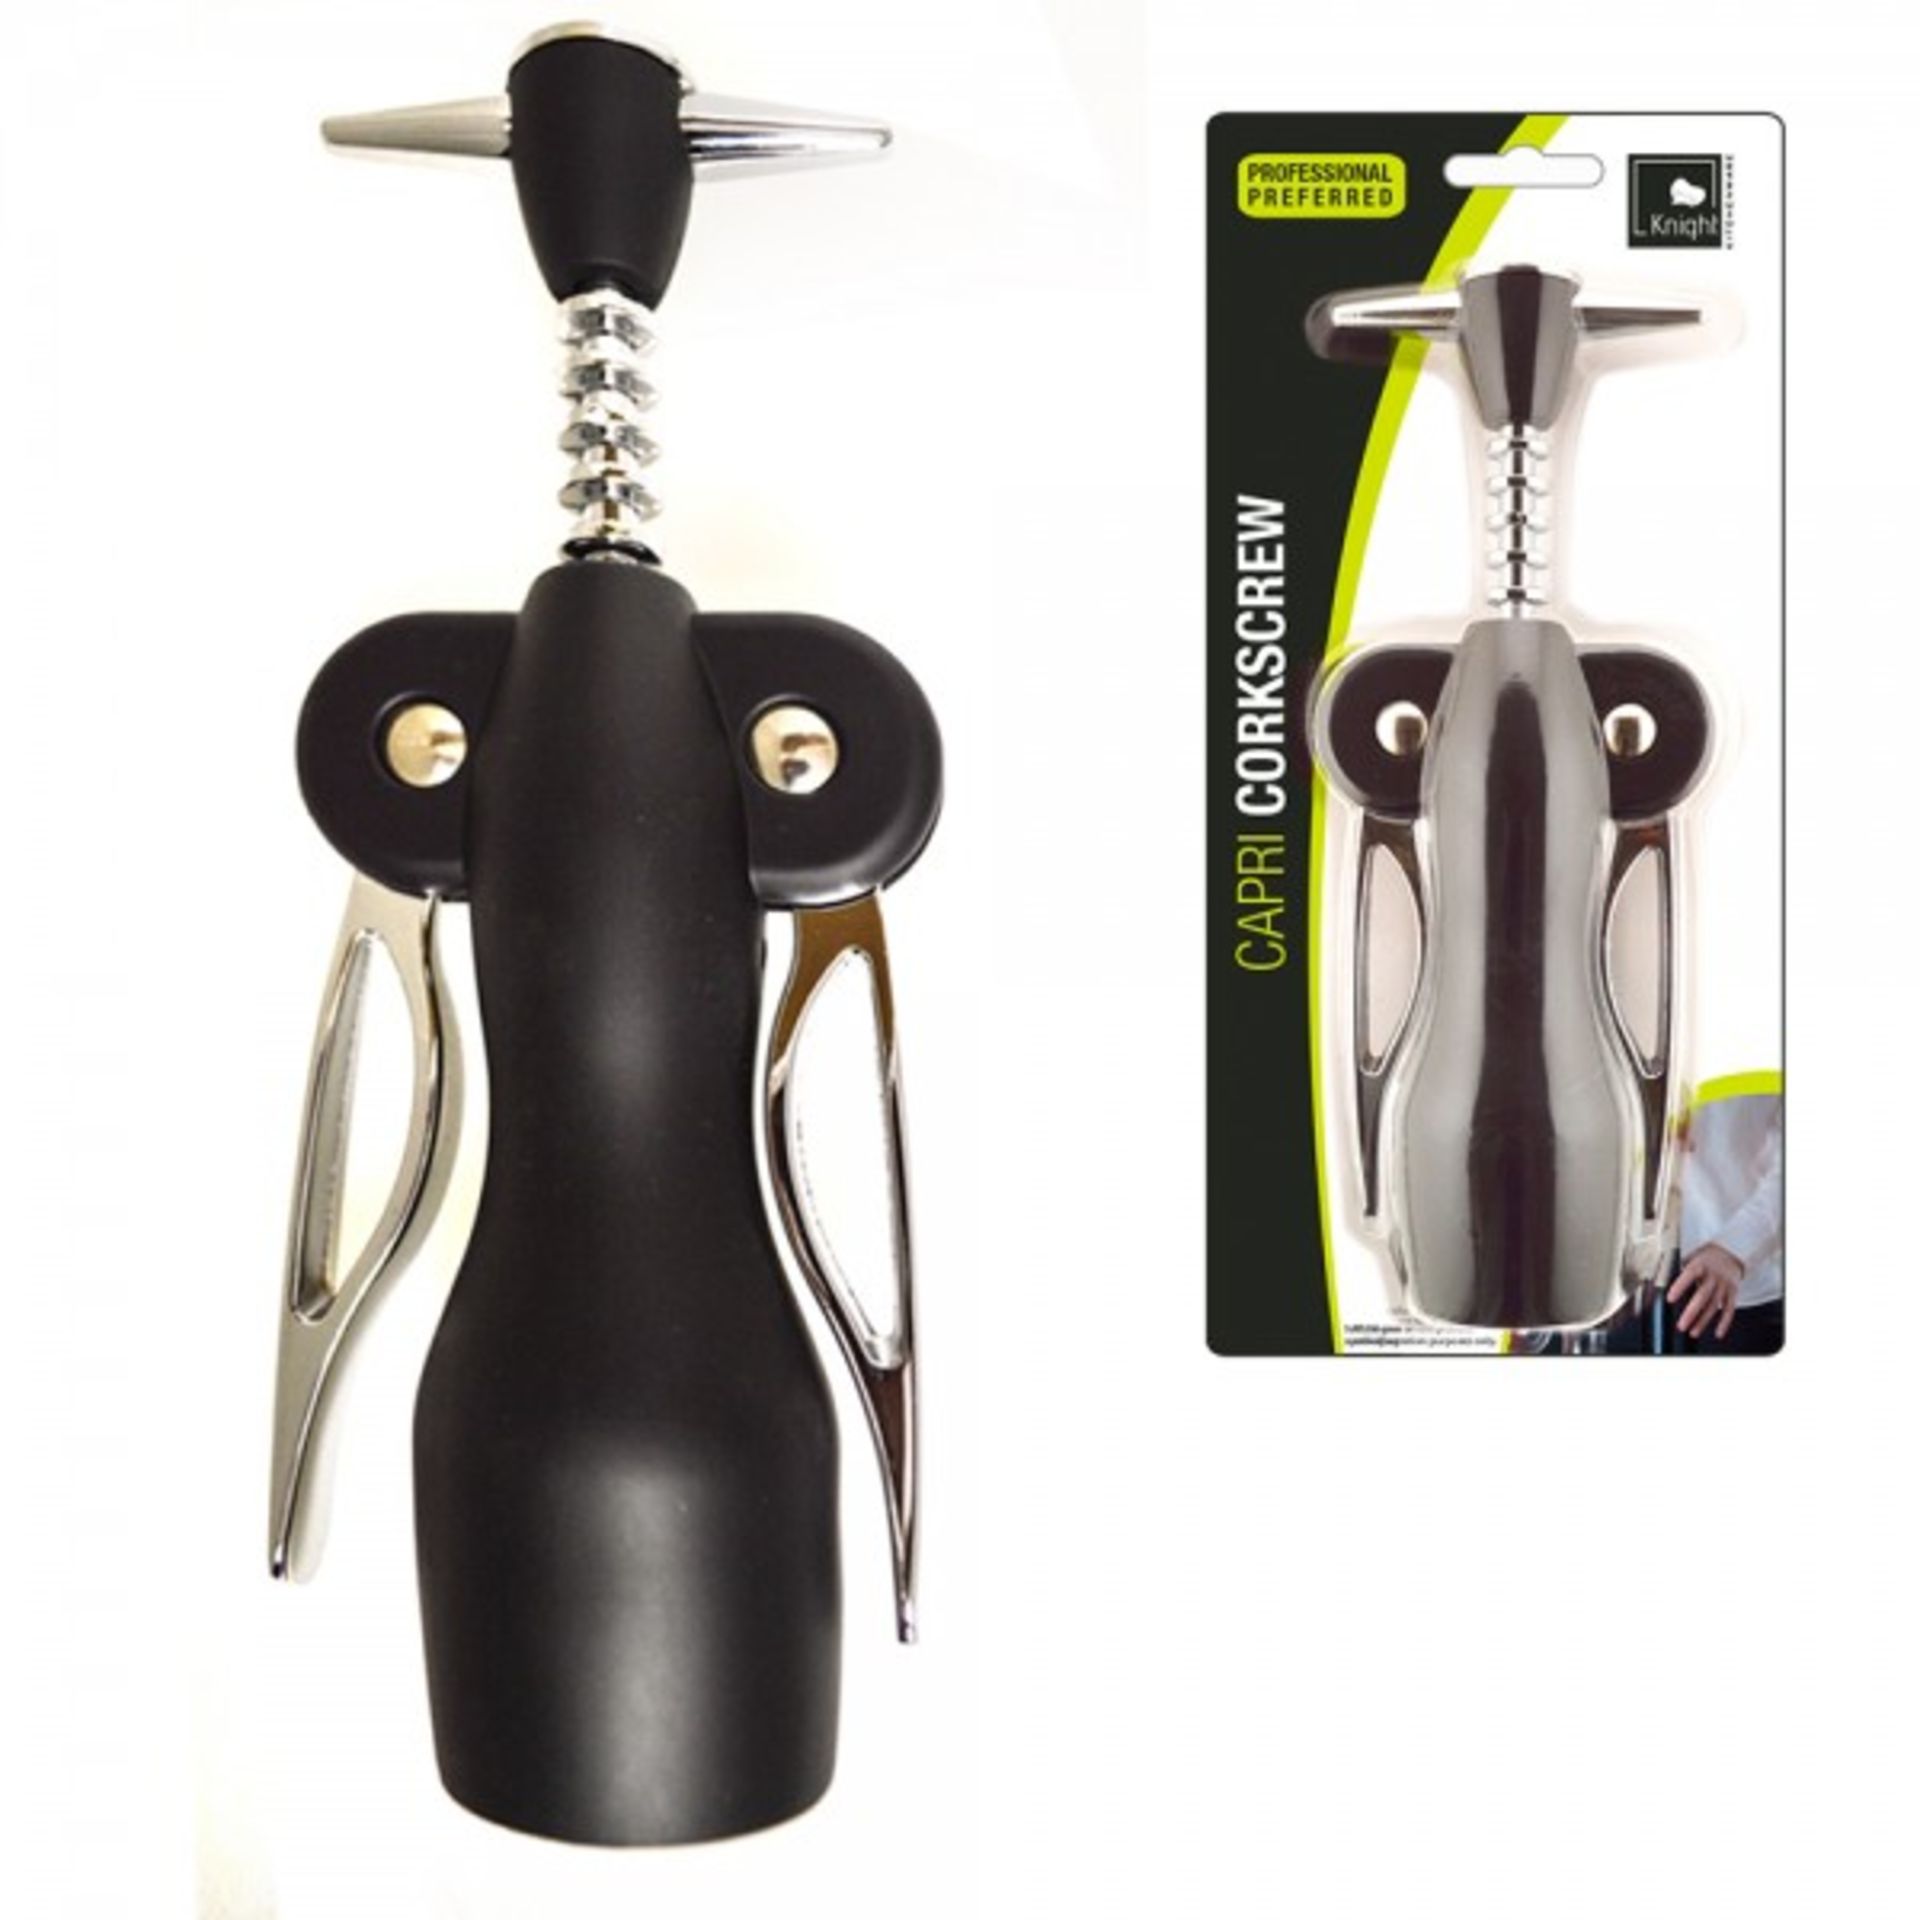 V *TRADE QTY* Brand New Capri Corkscrew Wine Bottle Opener X 5 YOUR BID PRICE TO BE MULTIPLIED BY